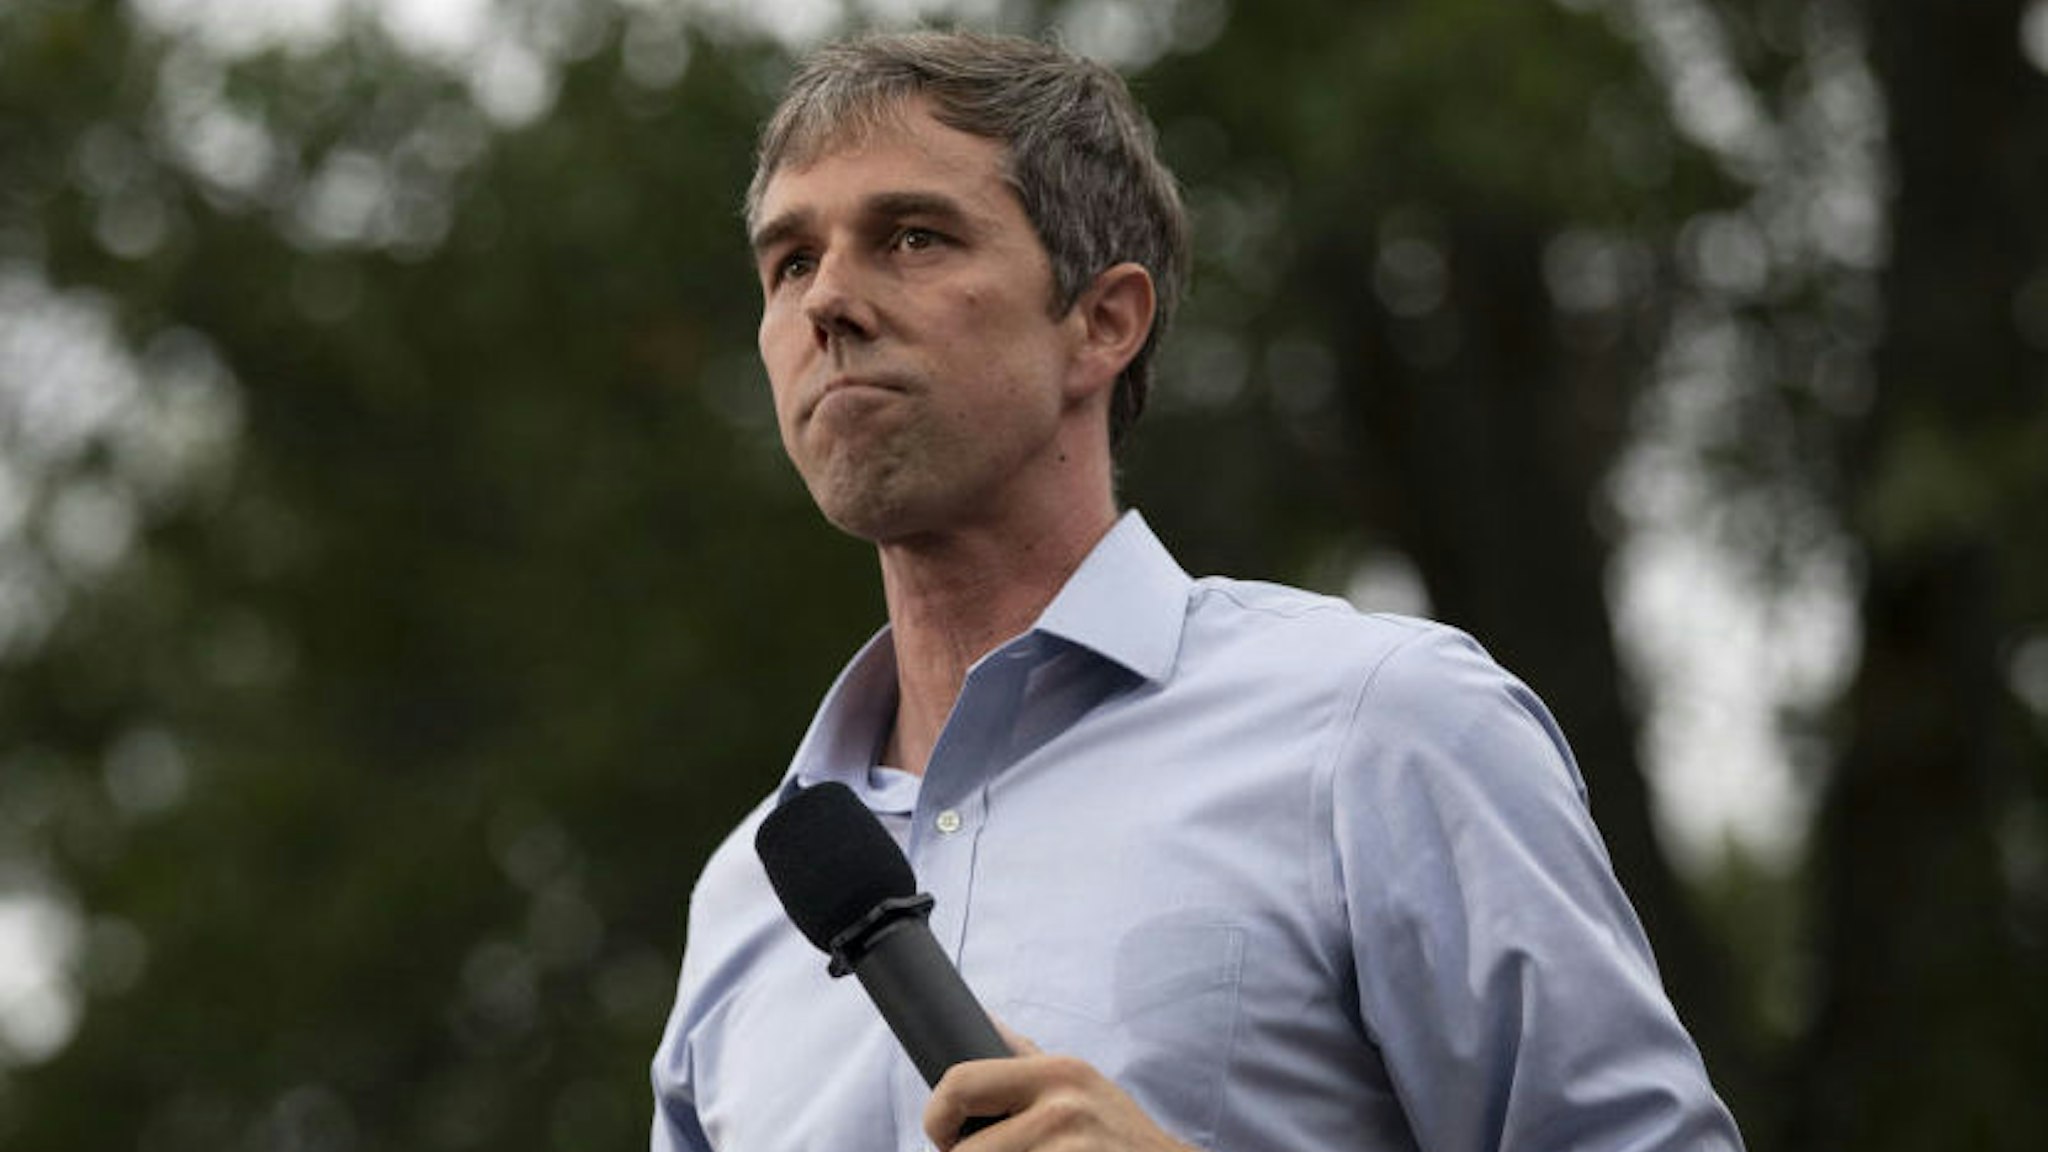 Beto O'Rourke, former Representative from Texas and 2020 Democratic presidential candidate, pauses while speaking at the Polk County Steak Fry in Des Moines, Iowa, U.S., on Saturday, Sept. 21, 2019. Presidential candidates gather in Iowa for the Polk County Democratic Party's largest annual steak fry in history, where they will work the grill and pitch the 12,000 expected attendees on their proposed ideas for the White House.